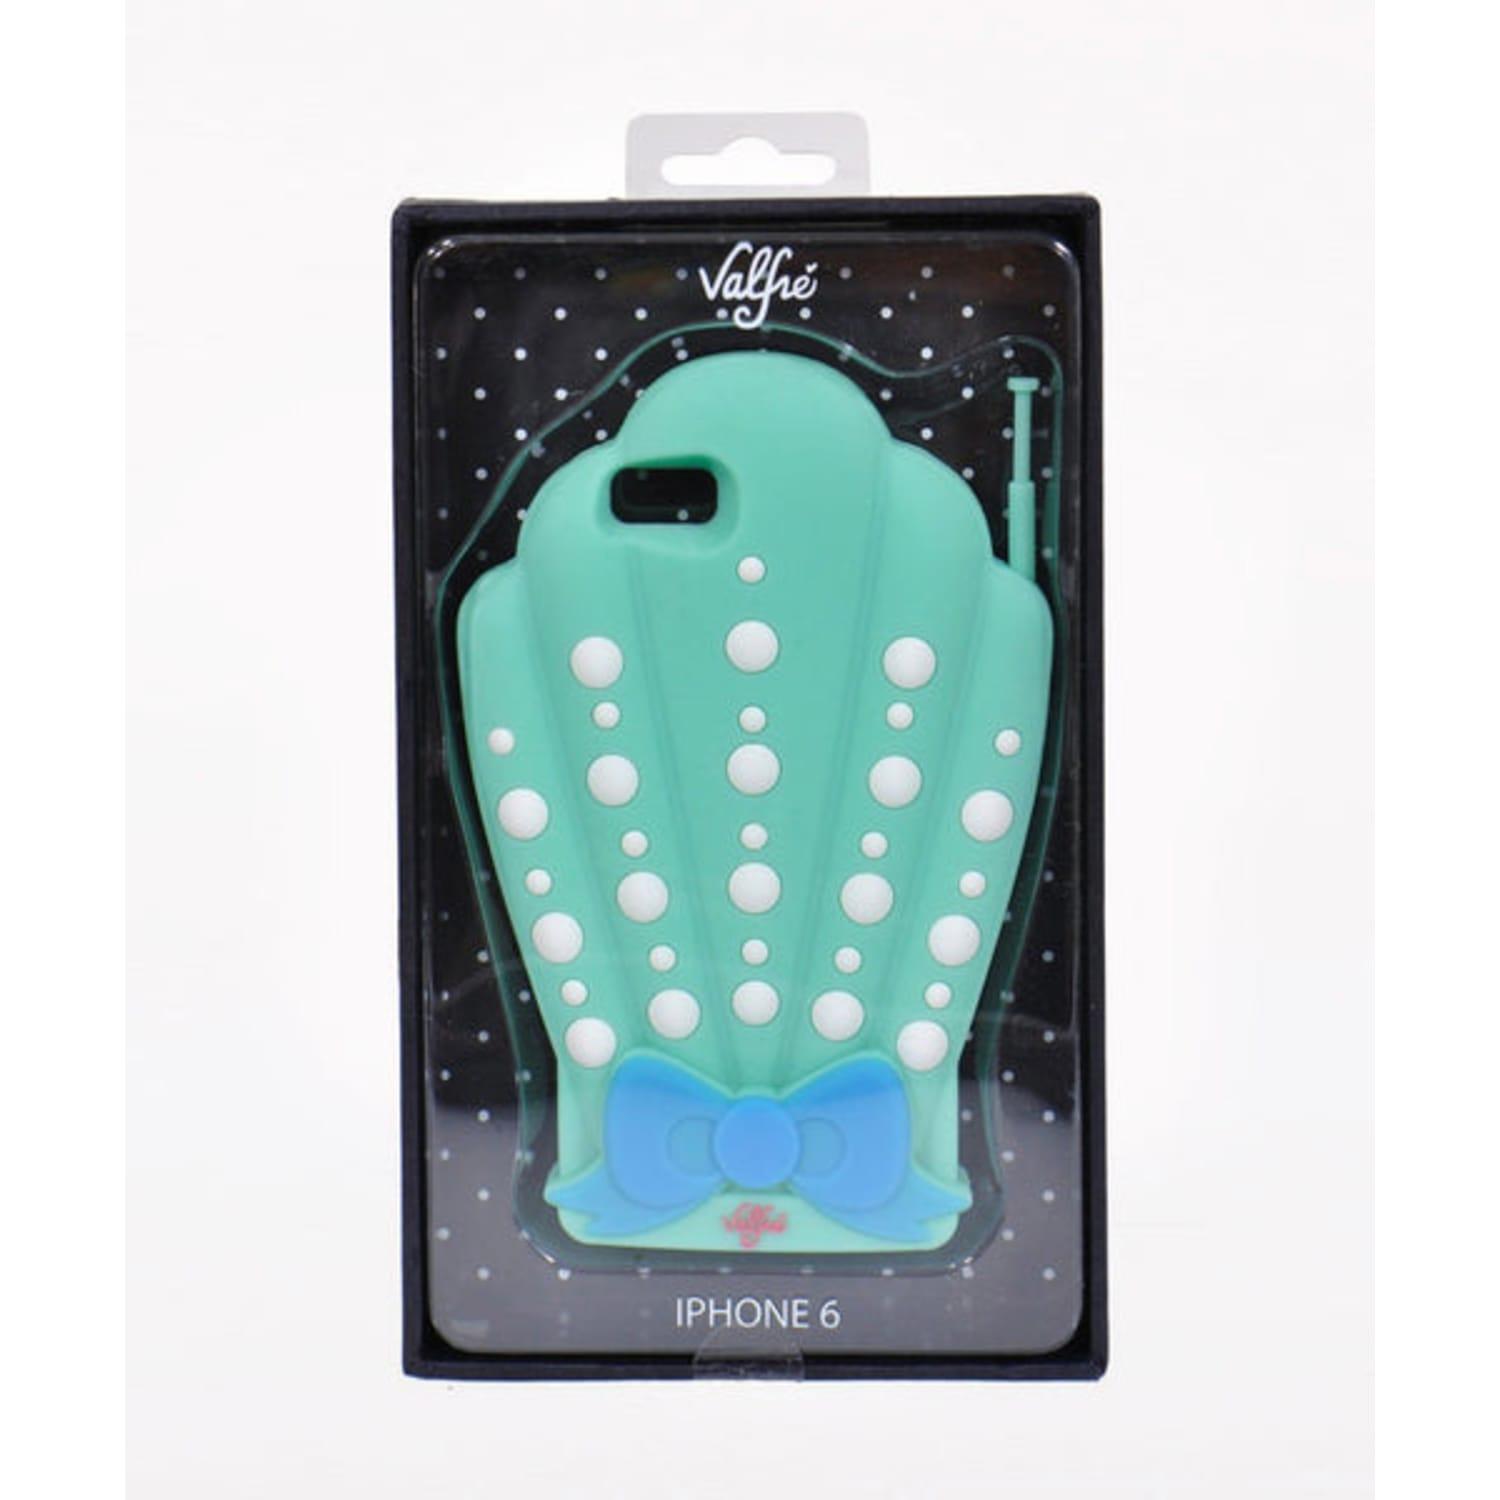 Valfre Shell 3d Iphone 6/6s Case in Blue | Lyst